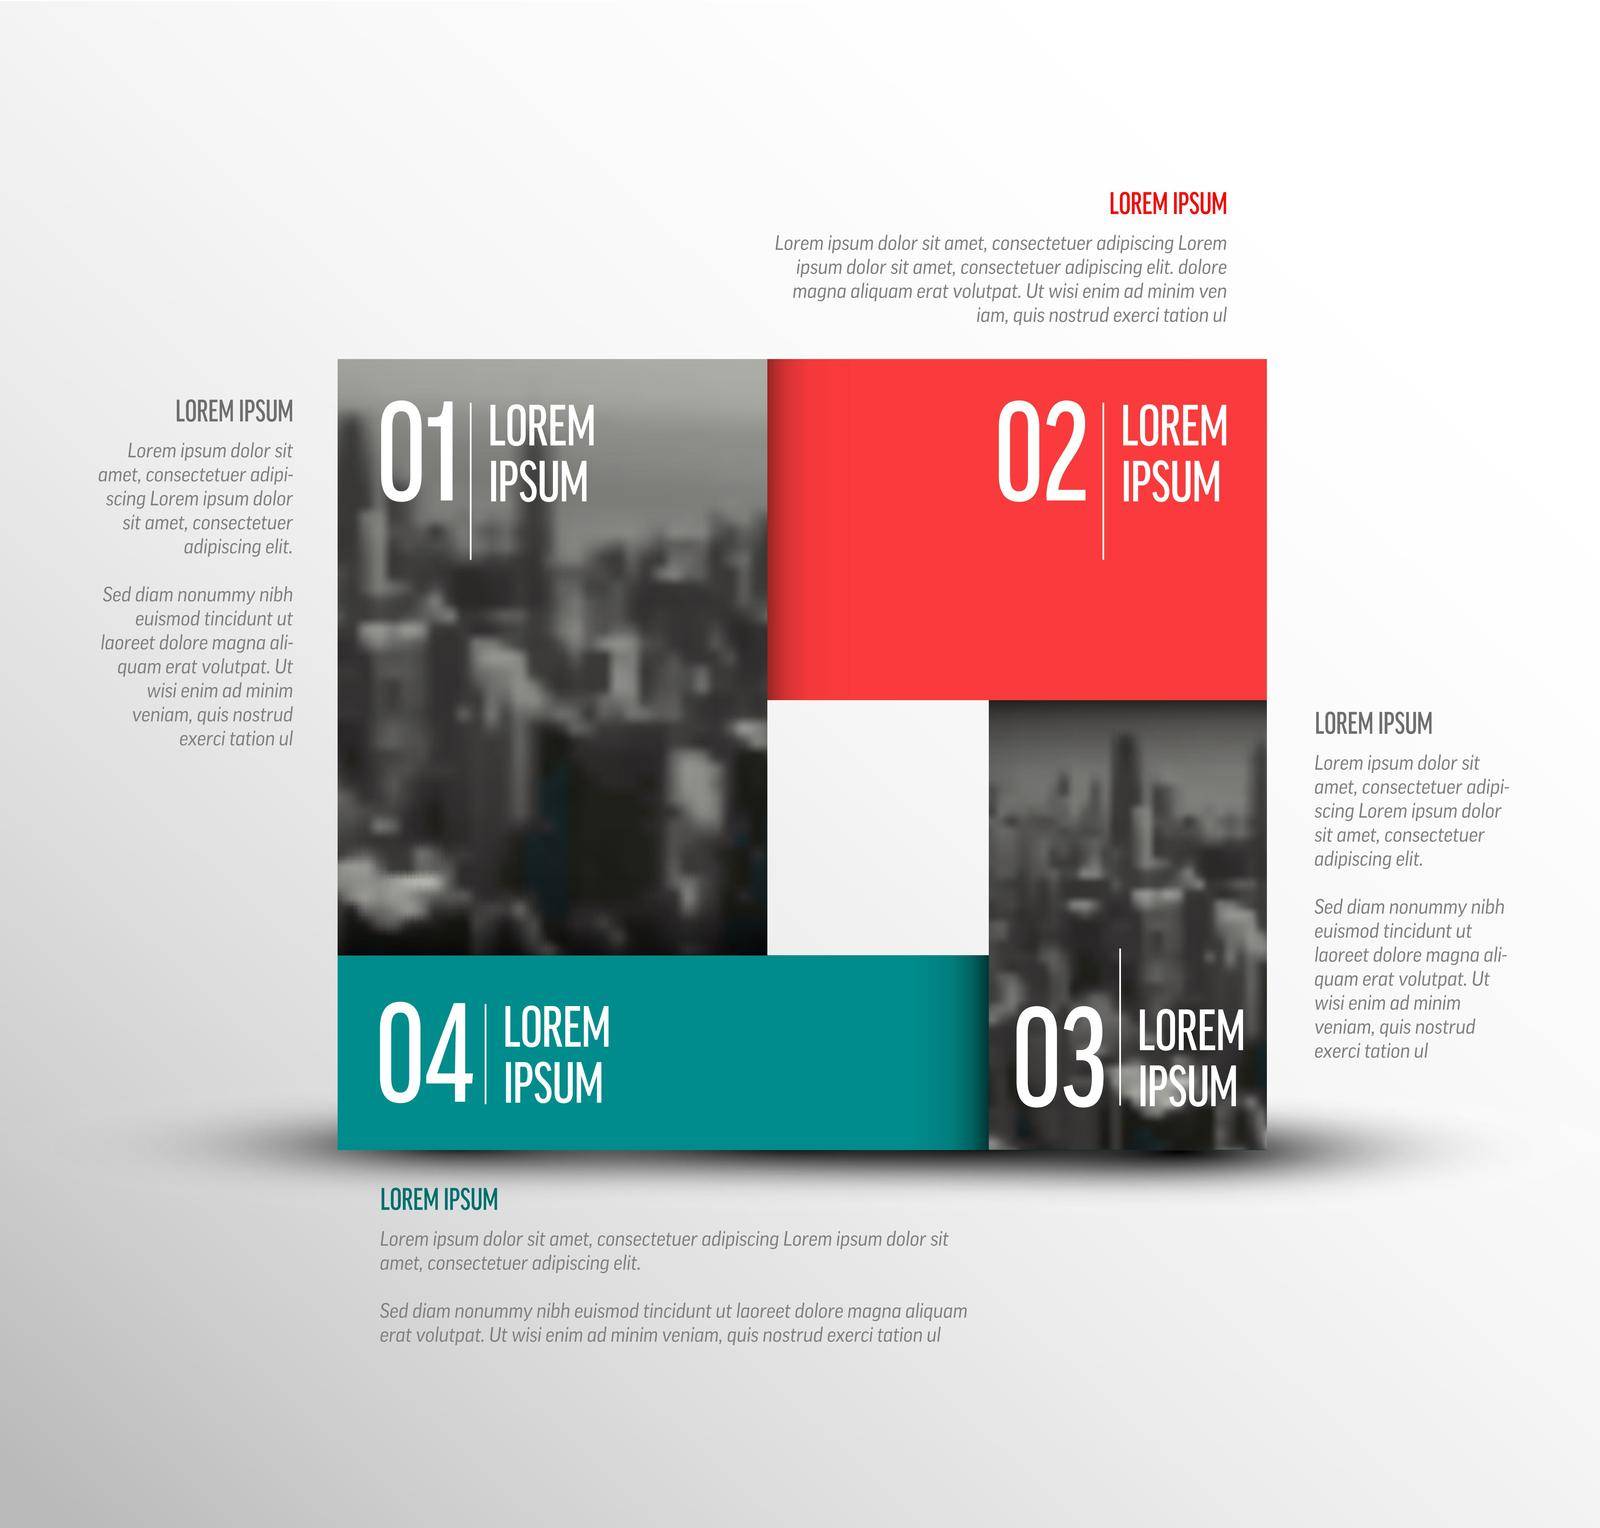 Simple infographic template with photo placeholders by orson